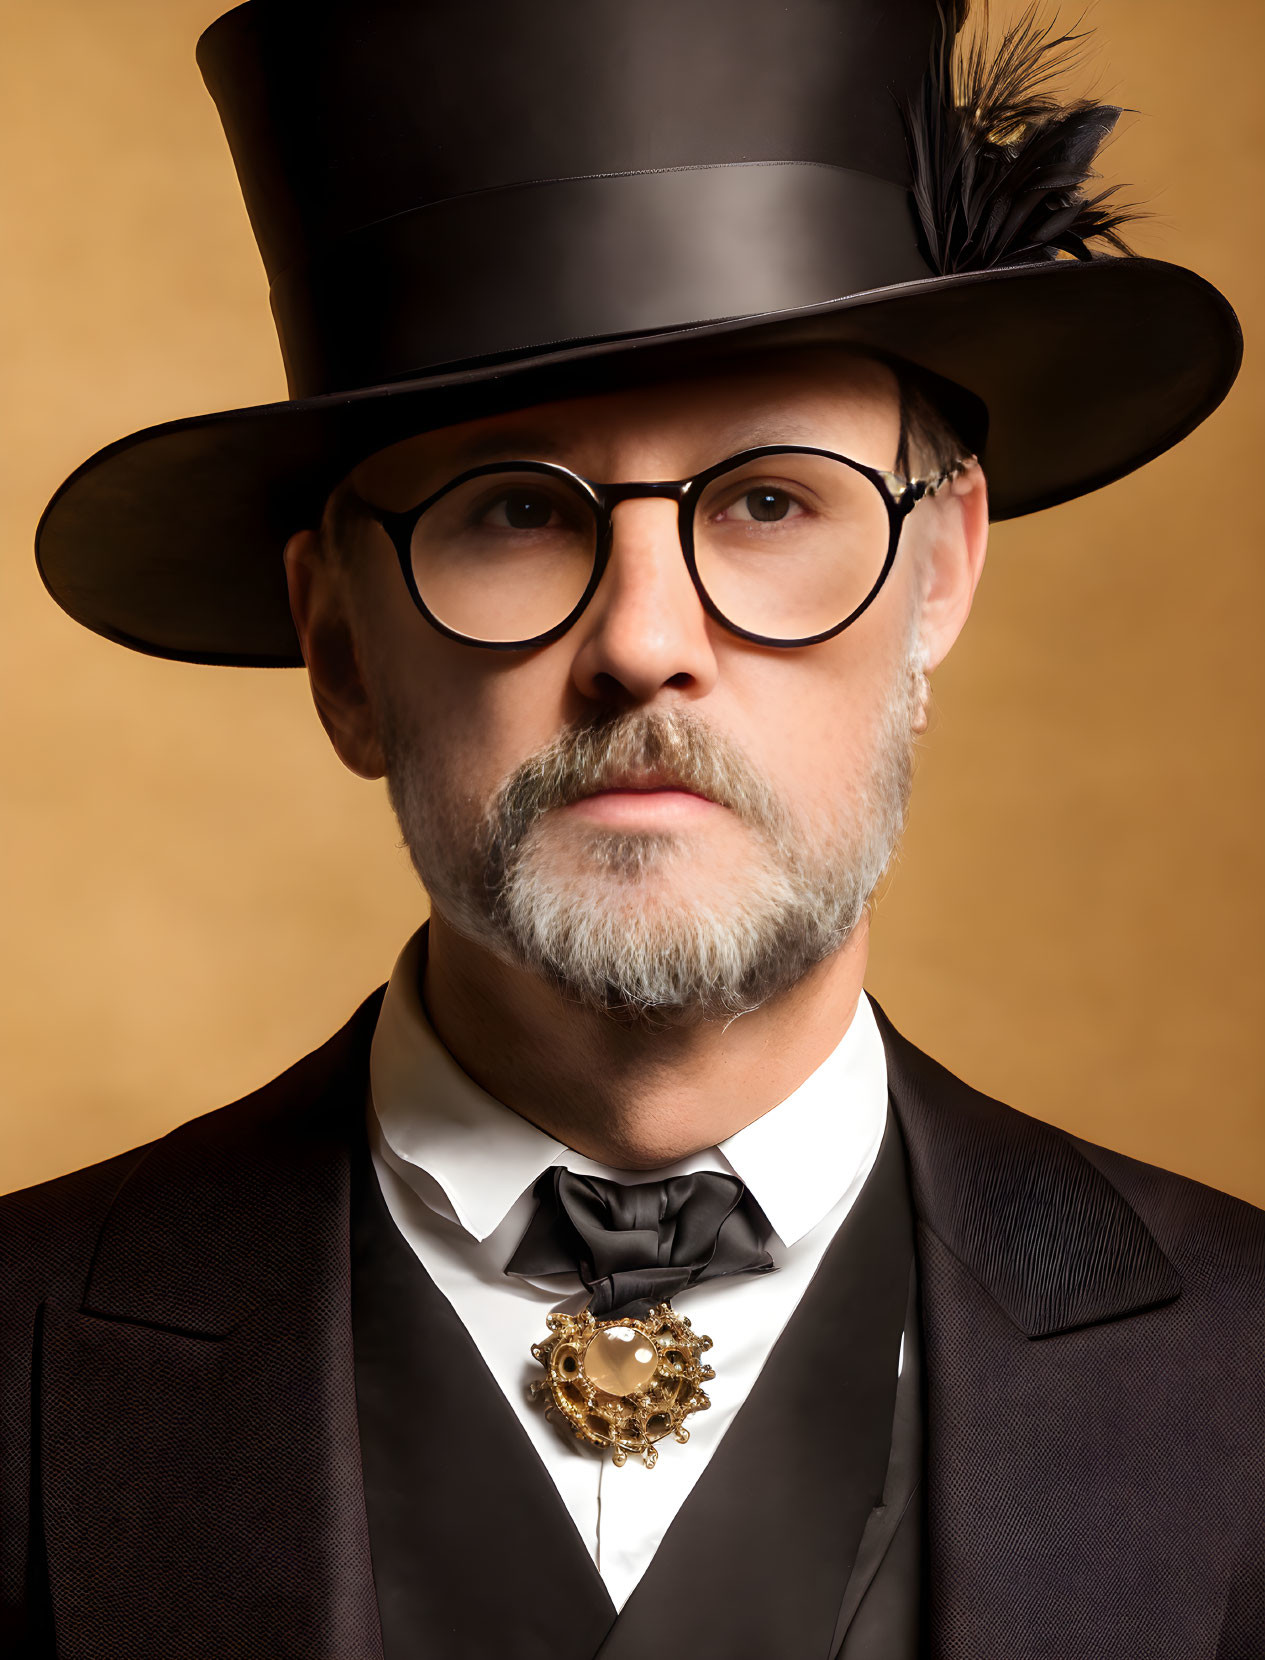 Man with Mustache, Round Glasses, Top Hat, Bow Tie, and Brooch on Tan Background